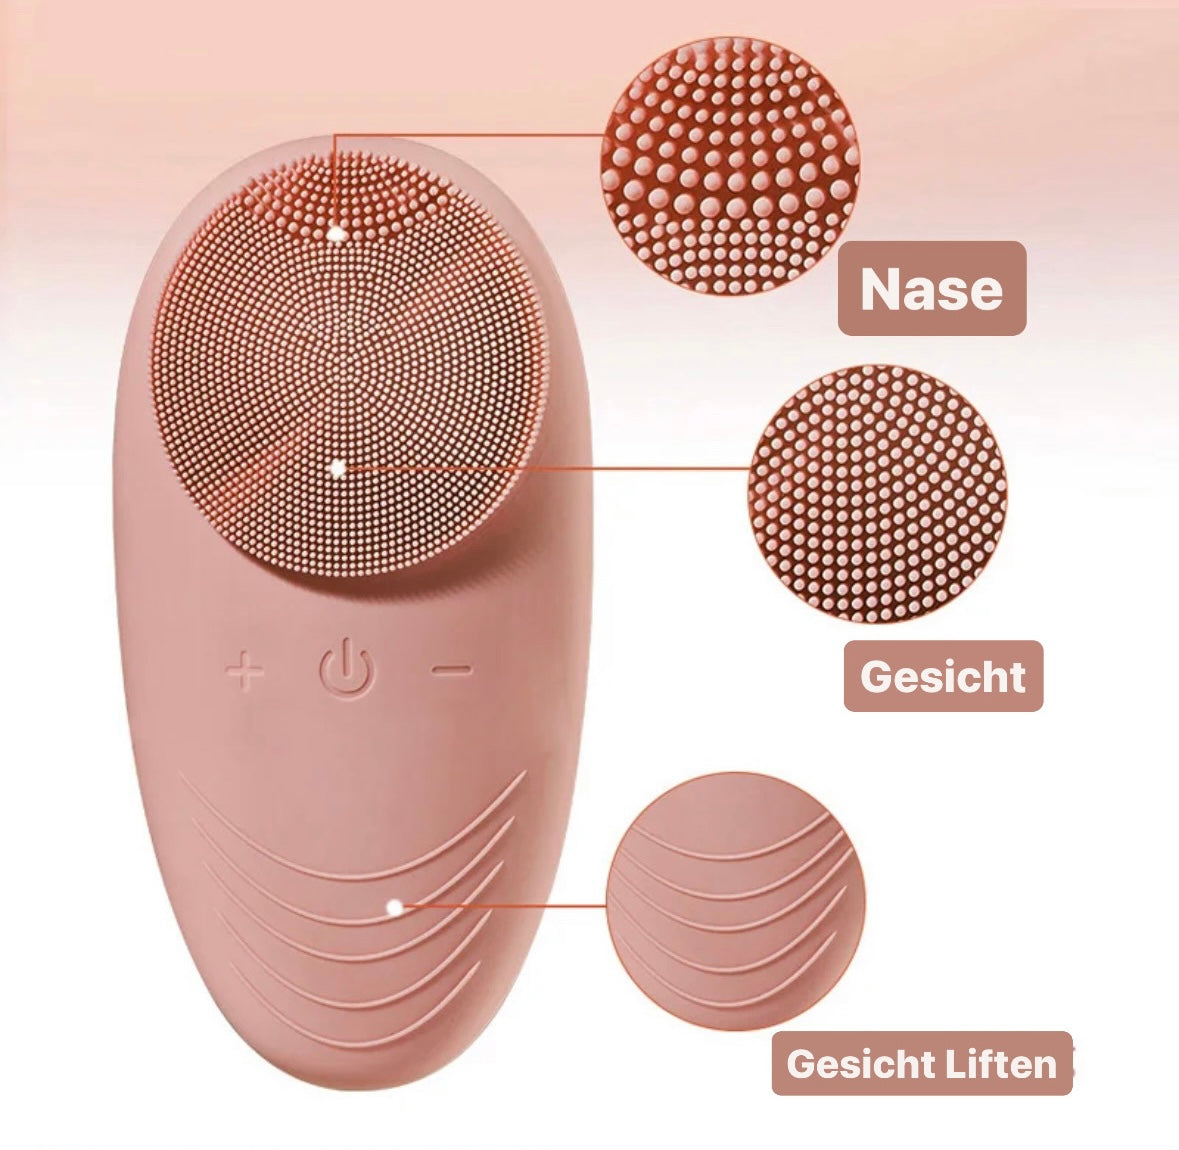 Facial cleansing and massage brush pink 